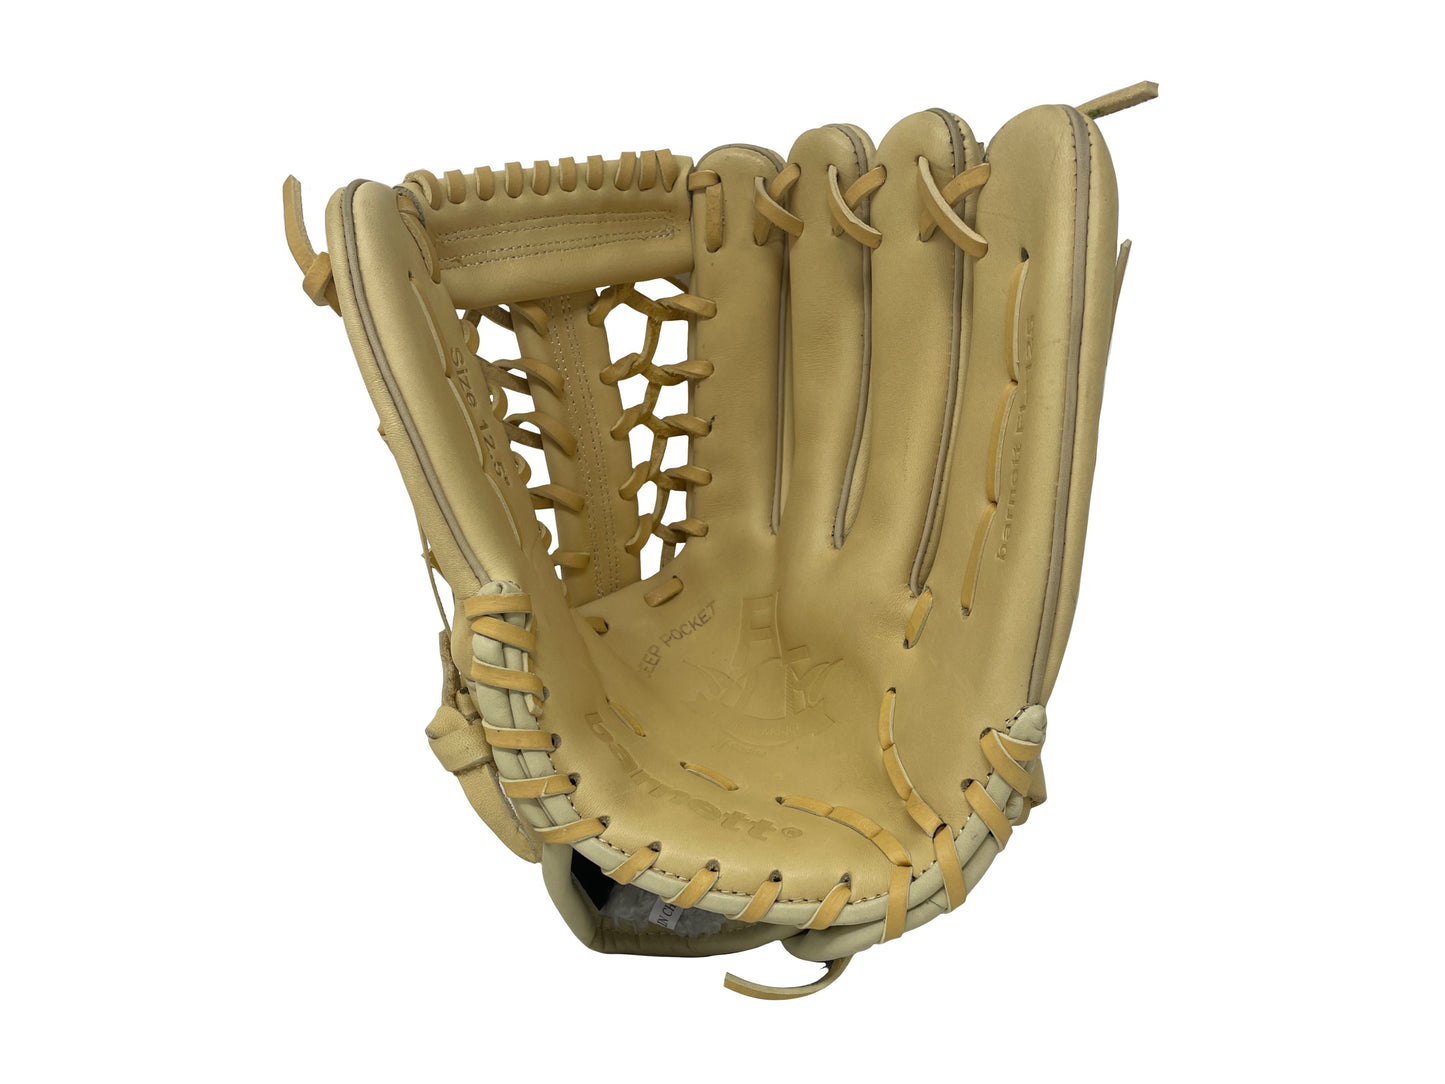 FL-125 High quality leather baseball glove, infield / outfield / pitcher, Beige